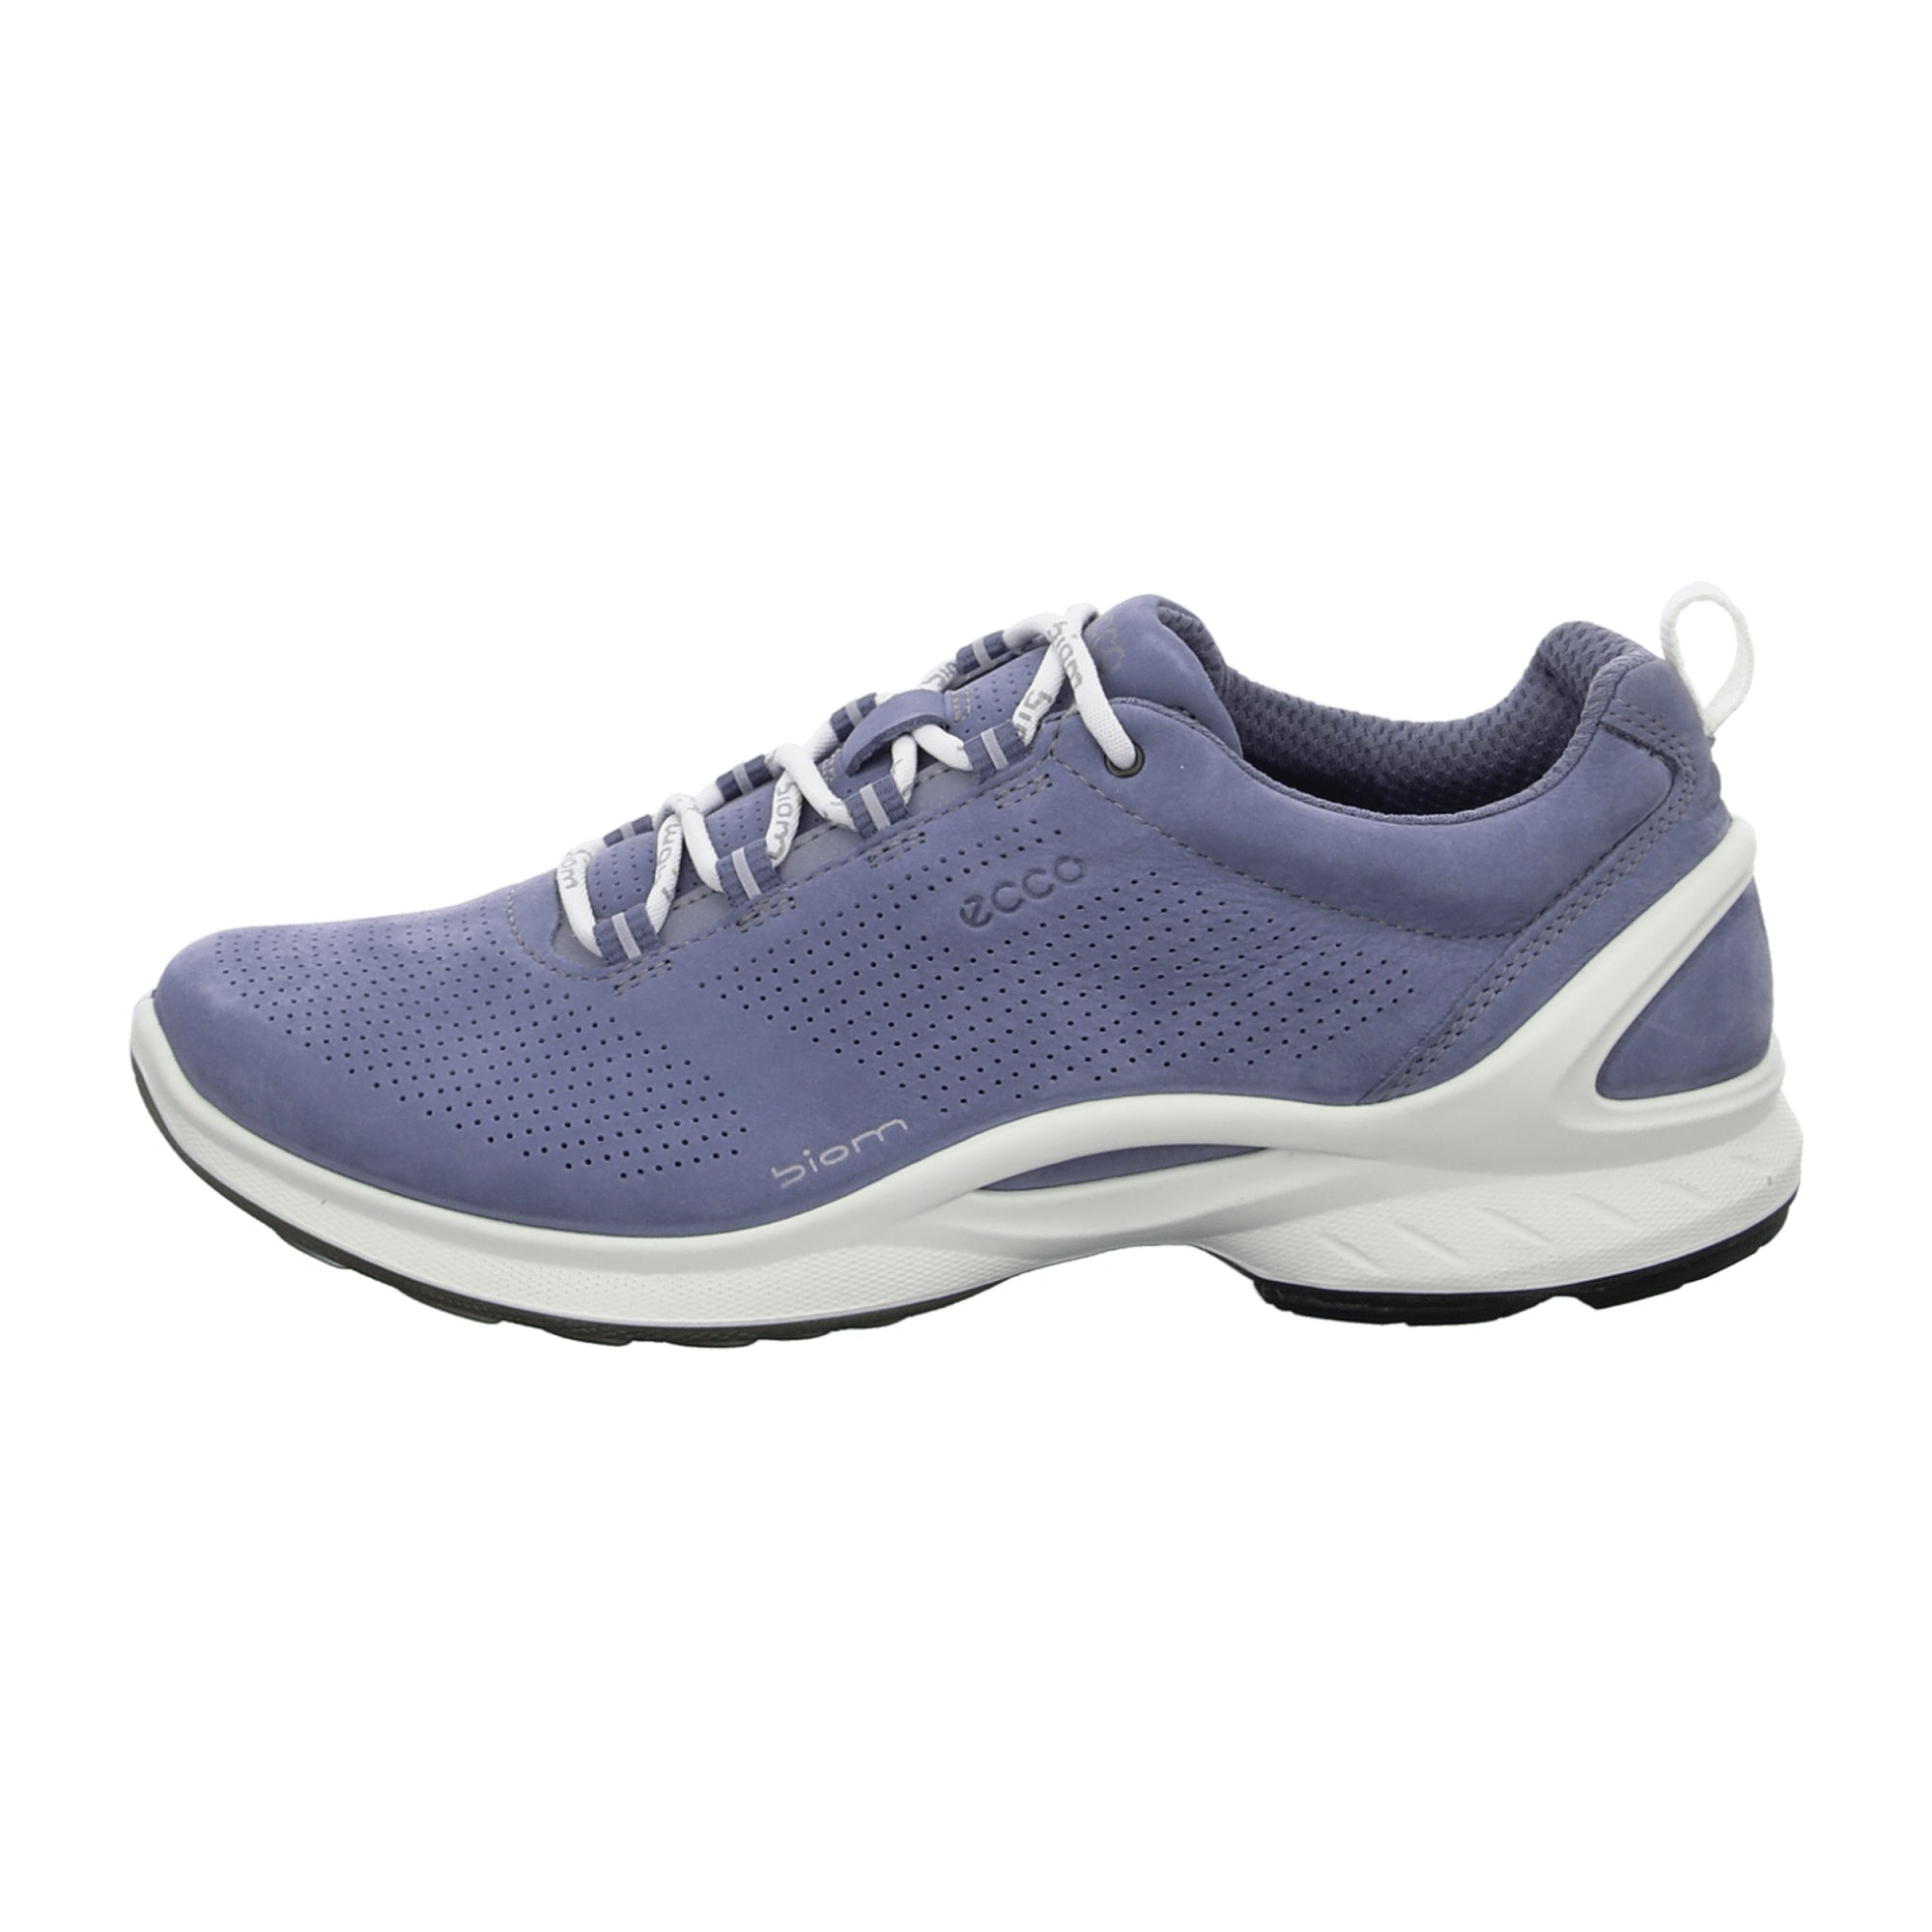 Ecco Biom Fjuel Women's Blue - Comfortable Athletic Shoes for Active Lifestyle